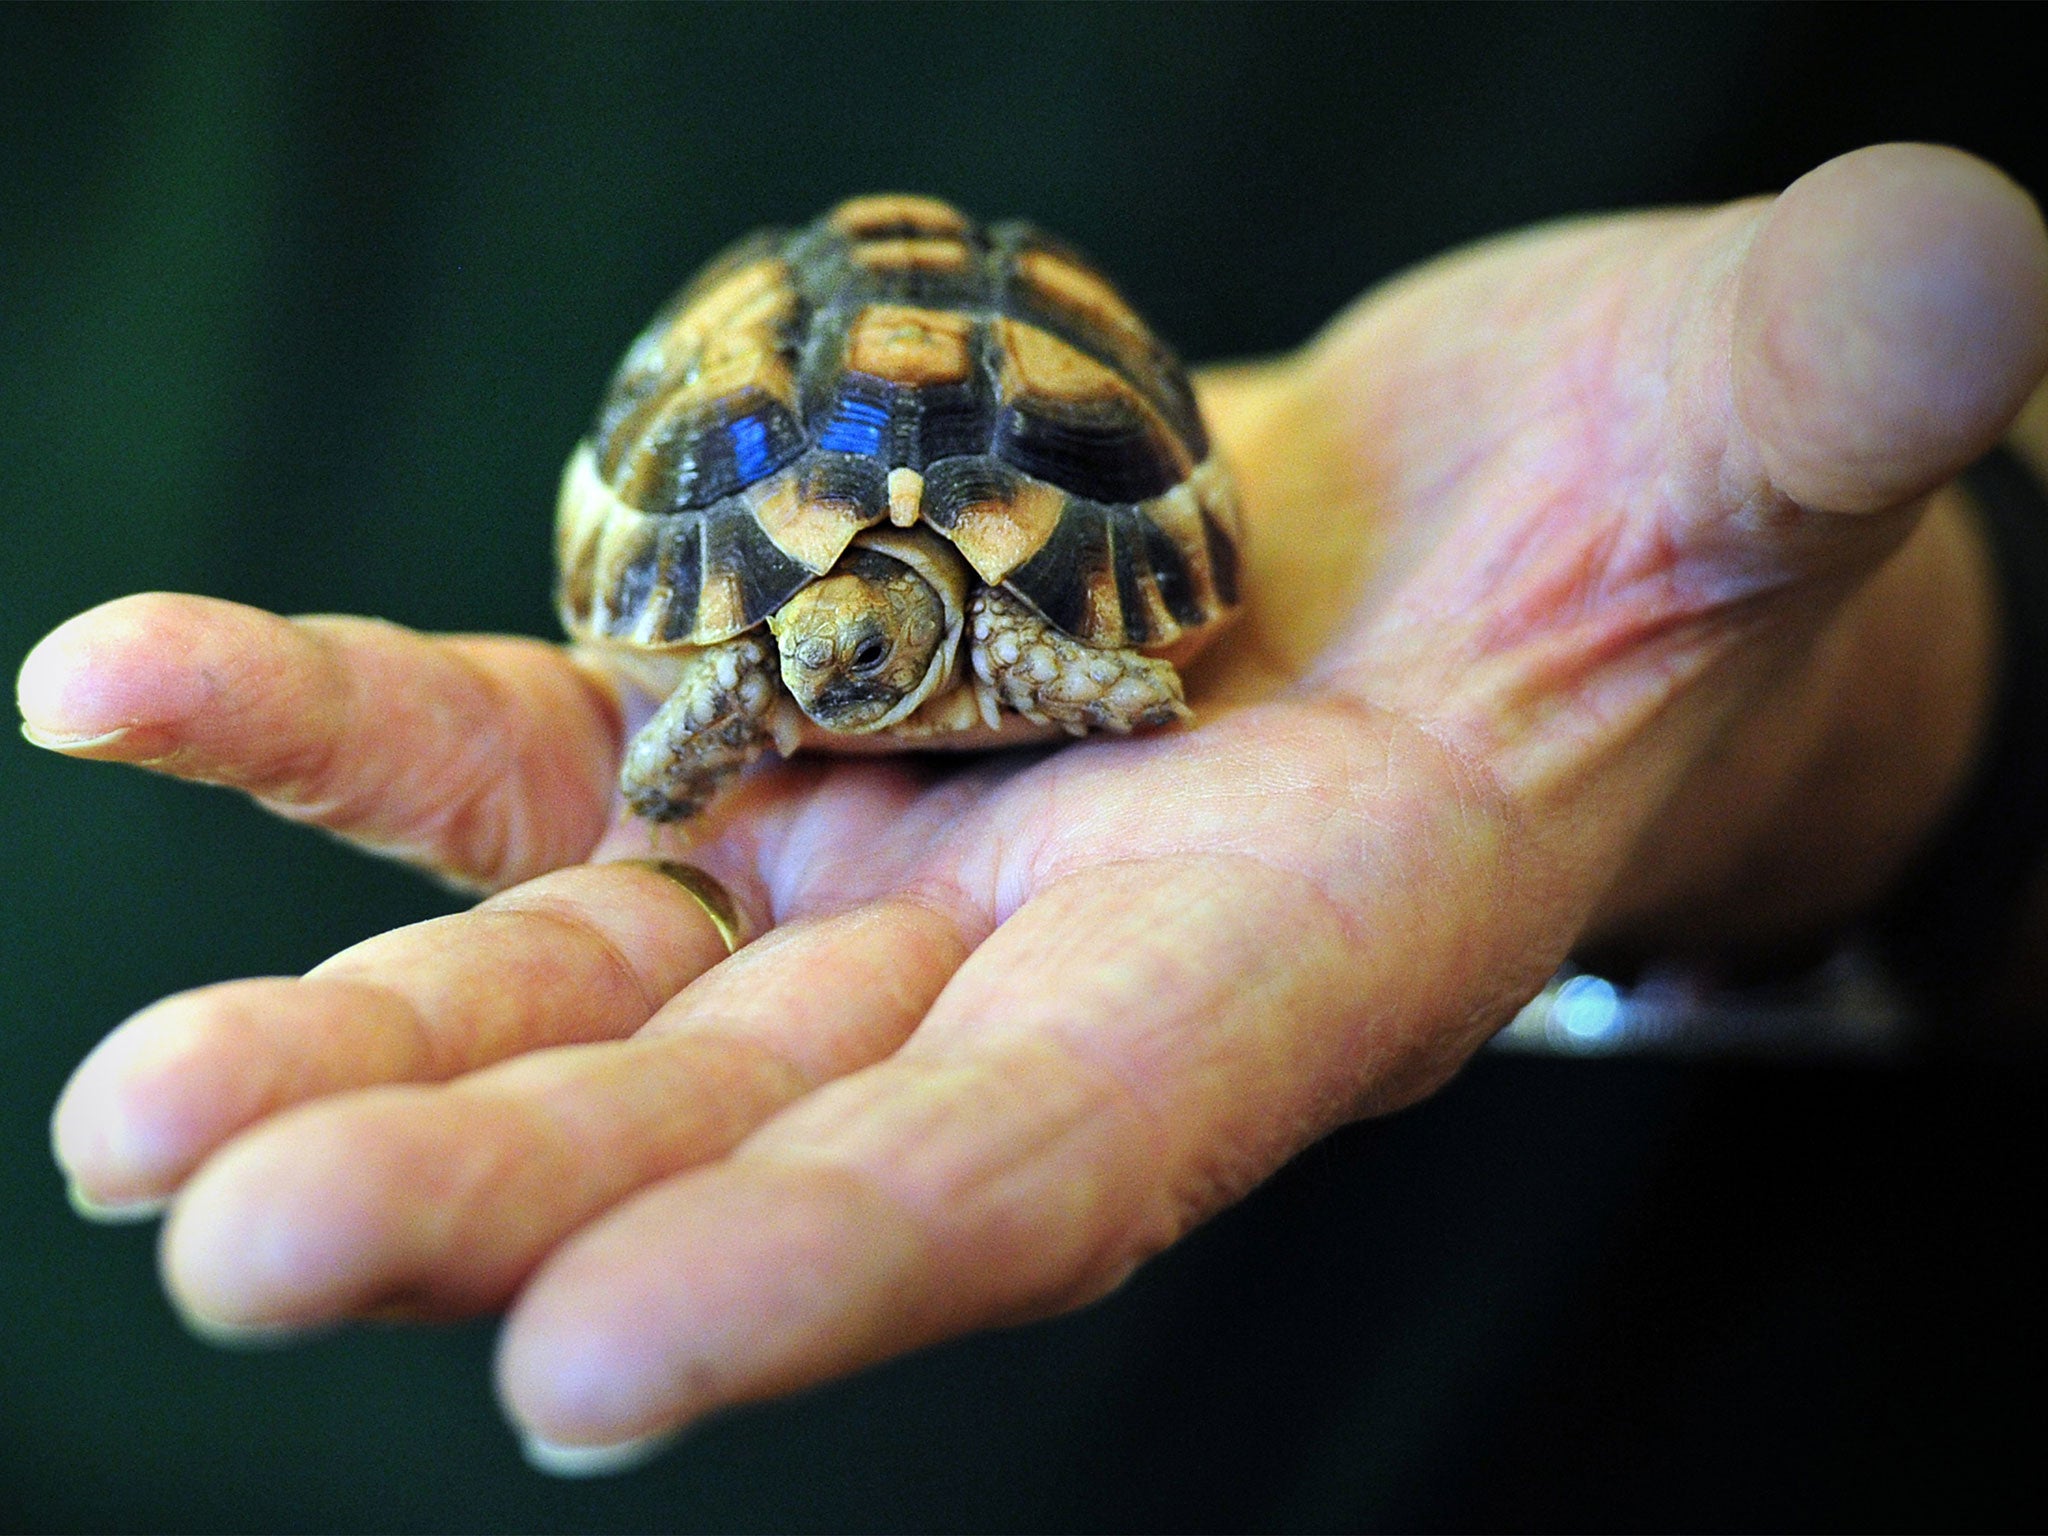 A tortoise, similar to the animal pictured, went missing twice in one weekend